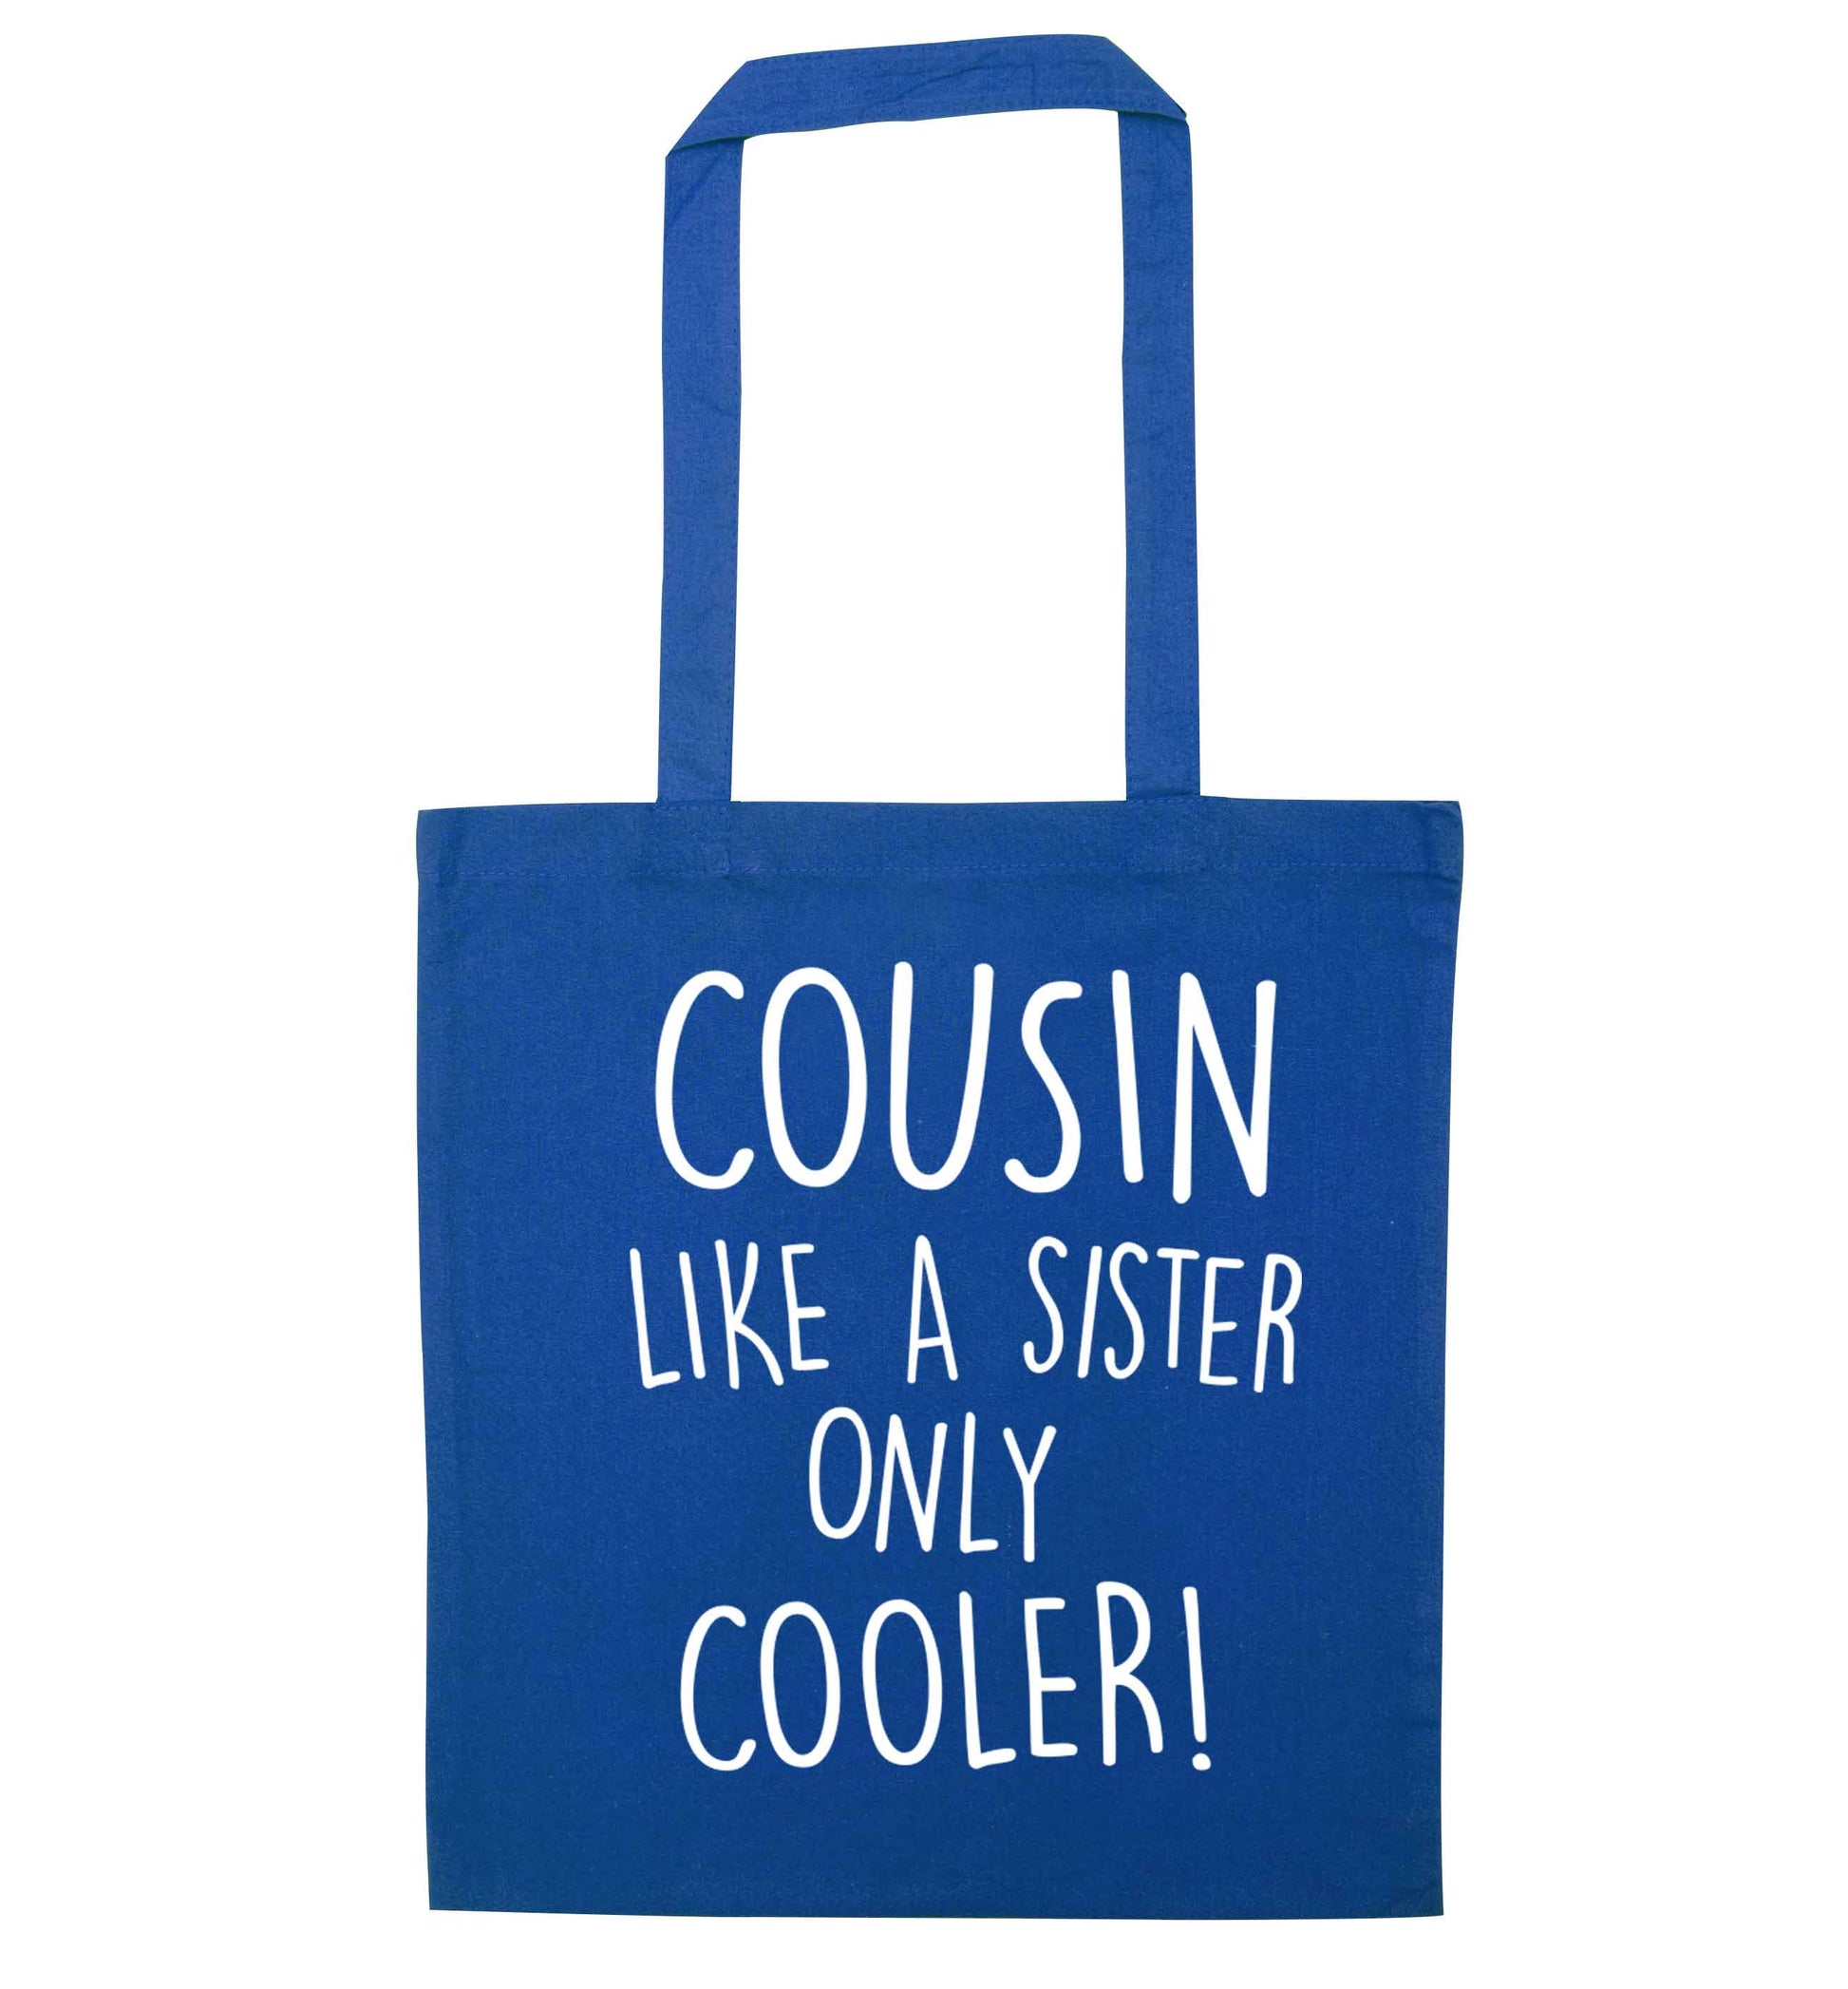 Cousin like a sister only cooler blue tote bag